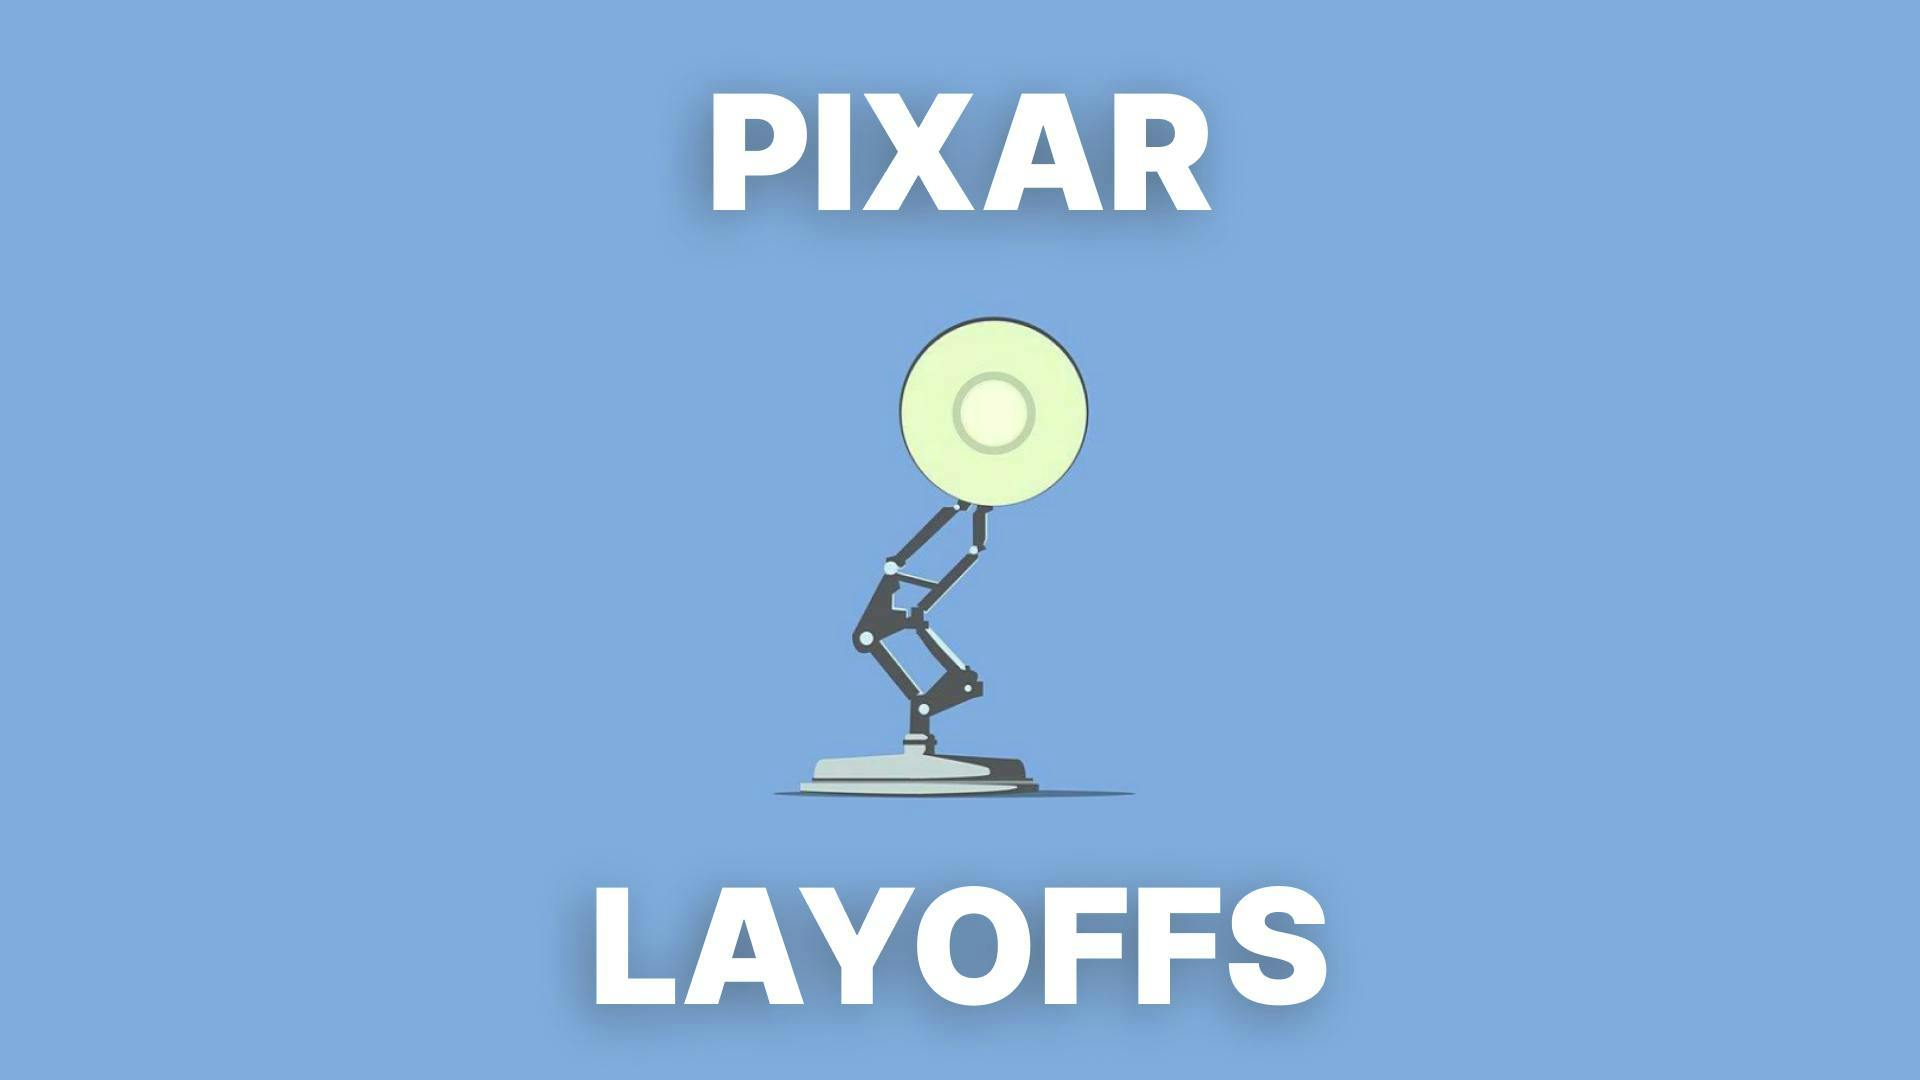 Pixar Hit With Layoffs as 175 Staffers Cut